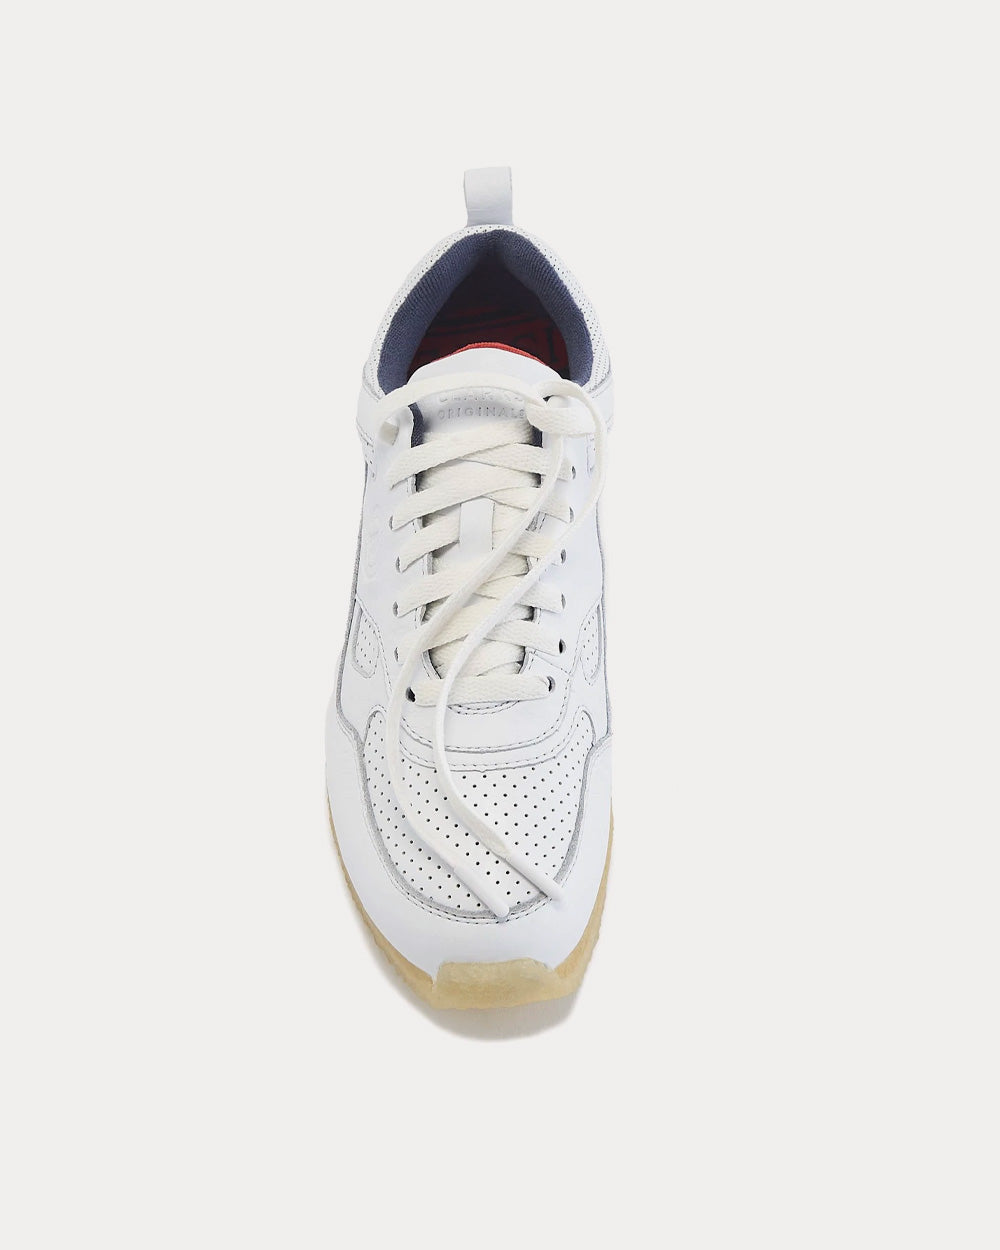 Clarks x Kith - Lockhill Suede White Low Top Sneakers